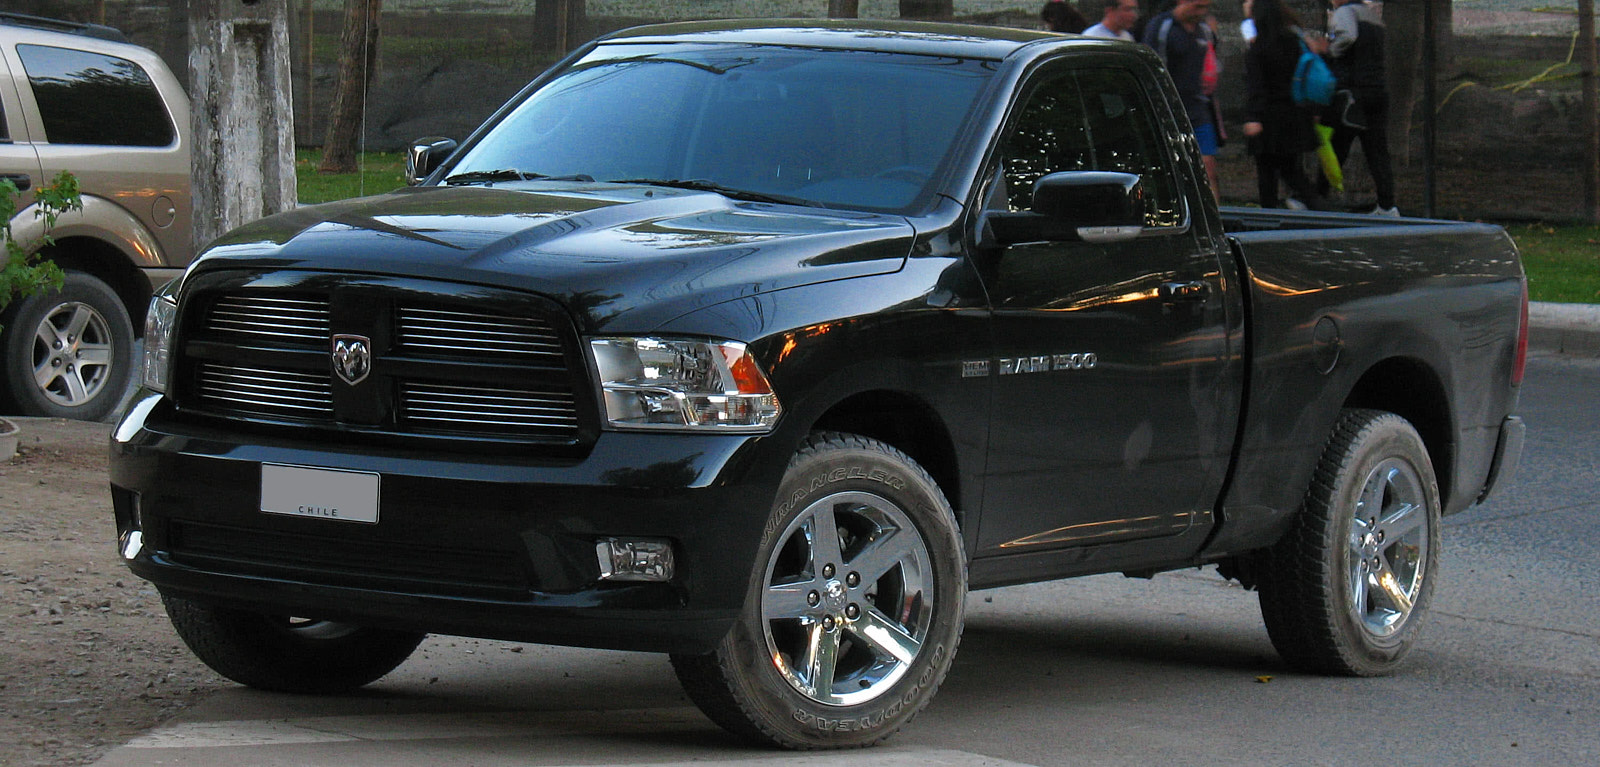 5 Best Tuners For Dodge 5.7 Hemi Ram 1500 & Buyers Guide (2020) image